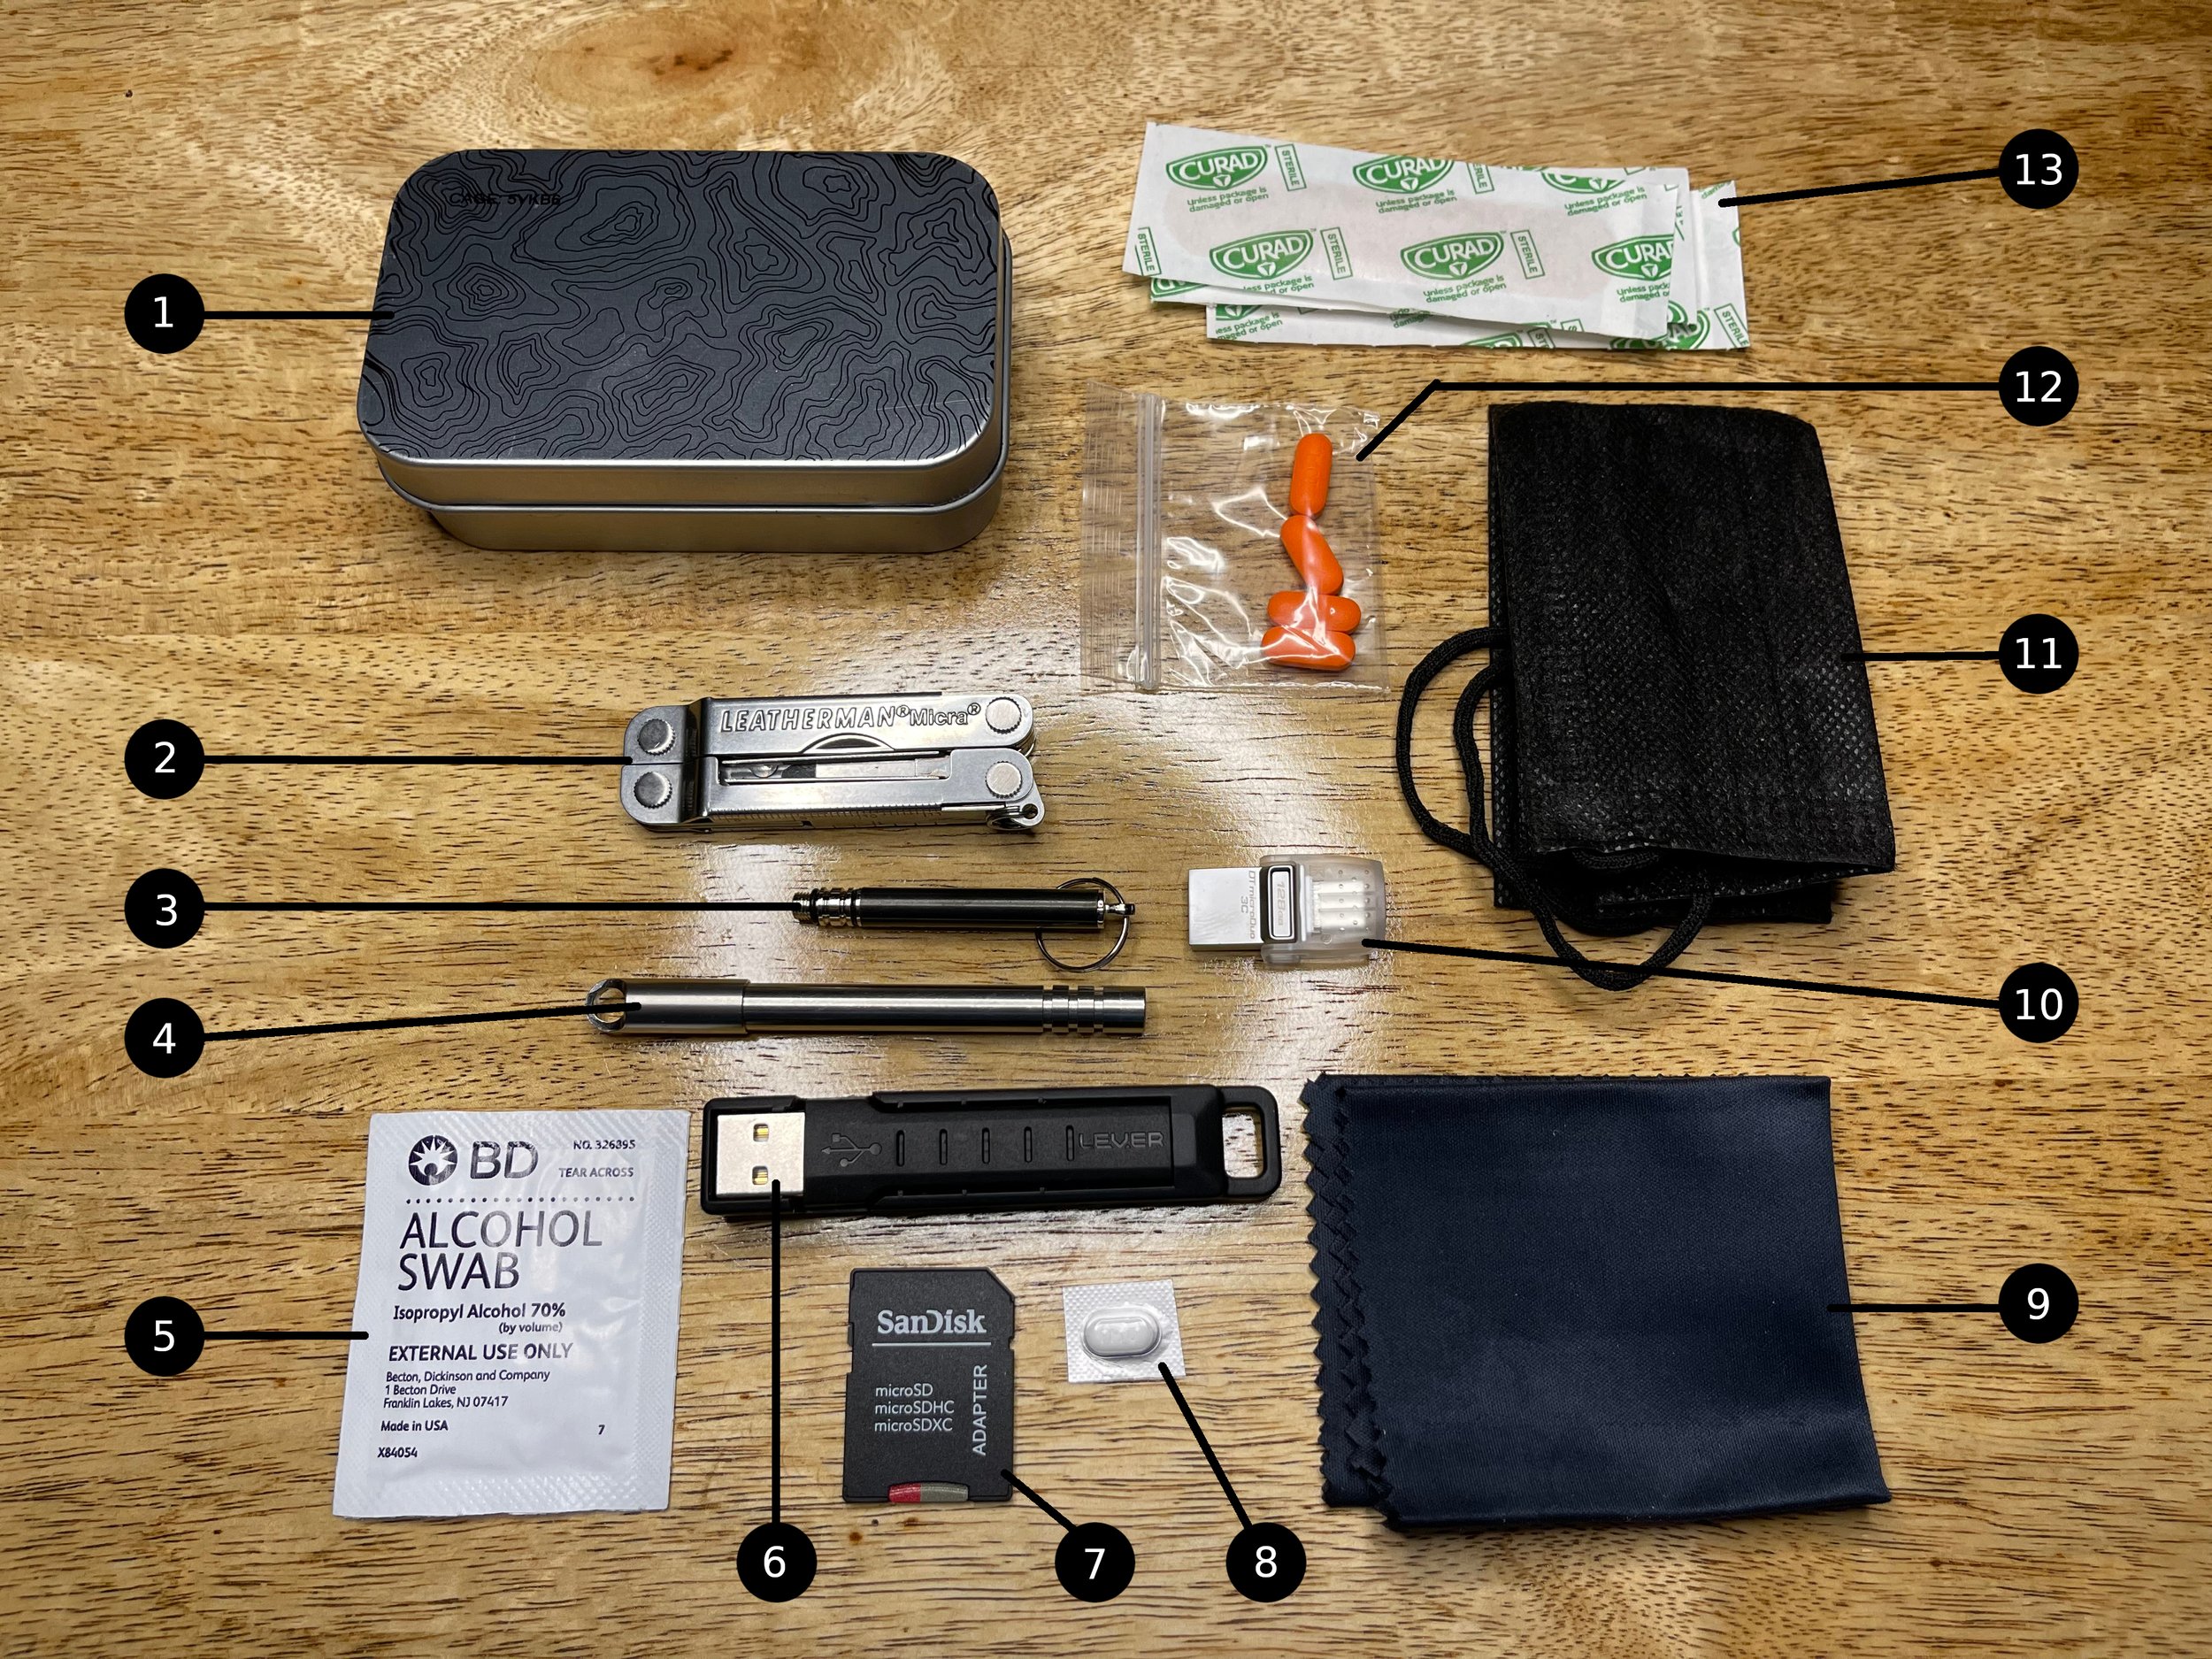 Here's How You Build an Altoids Tin Survival Kit to EDC (+Contents List)